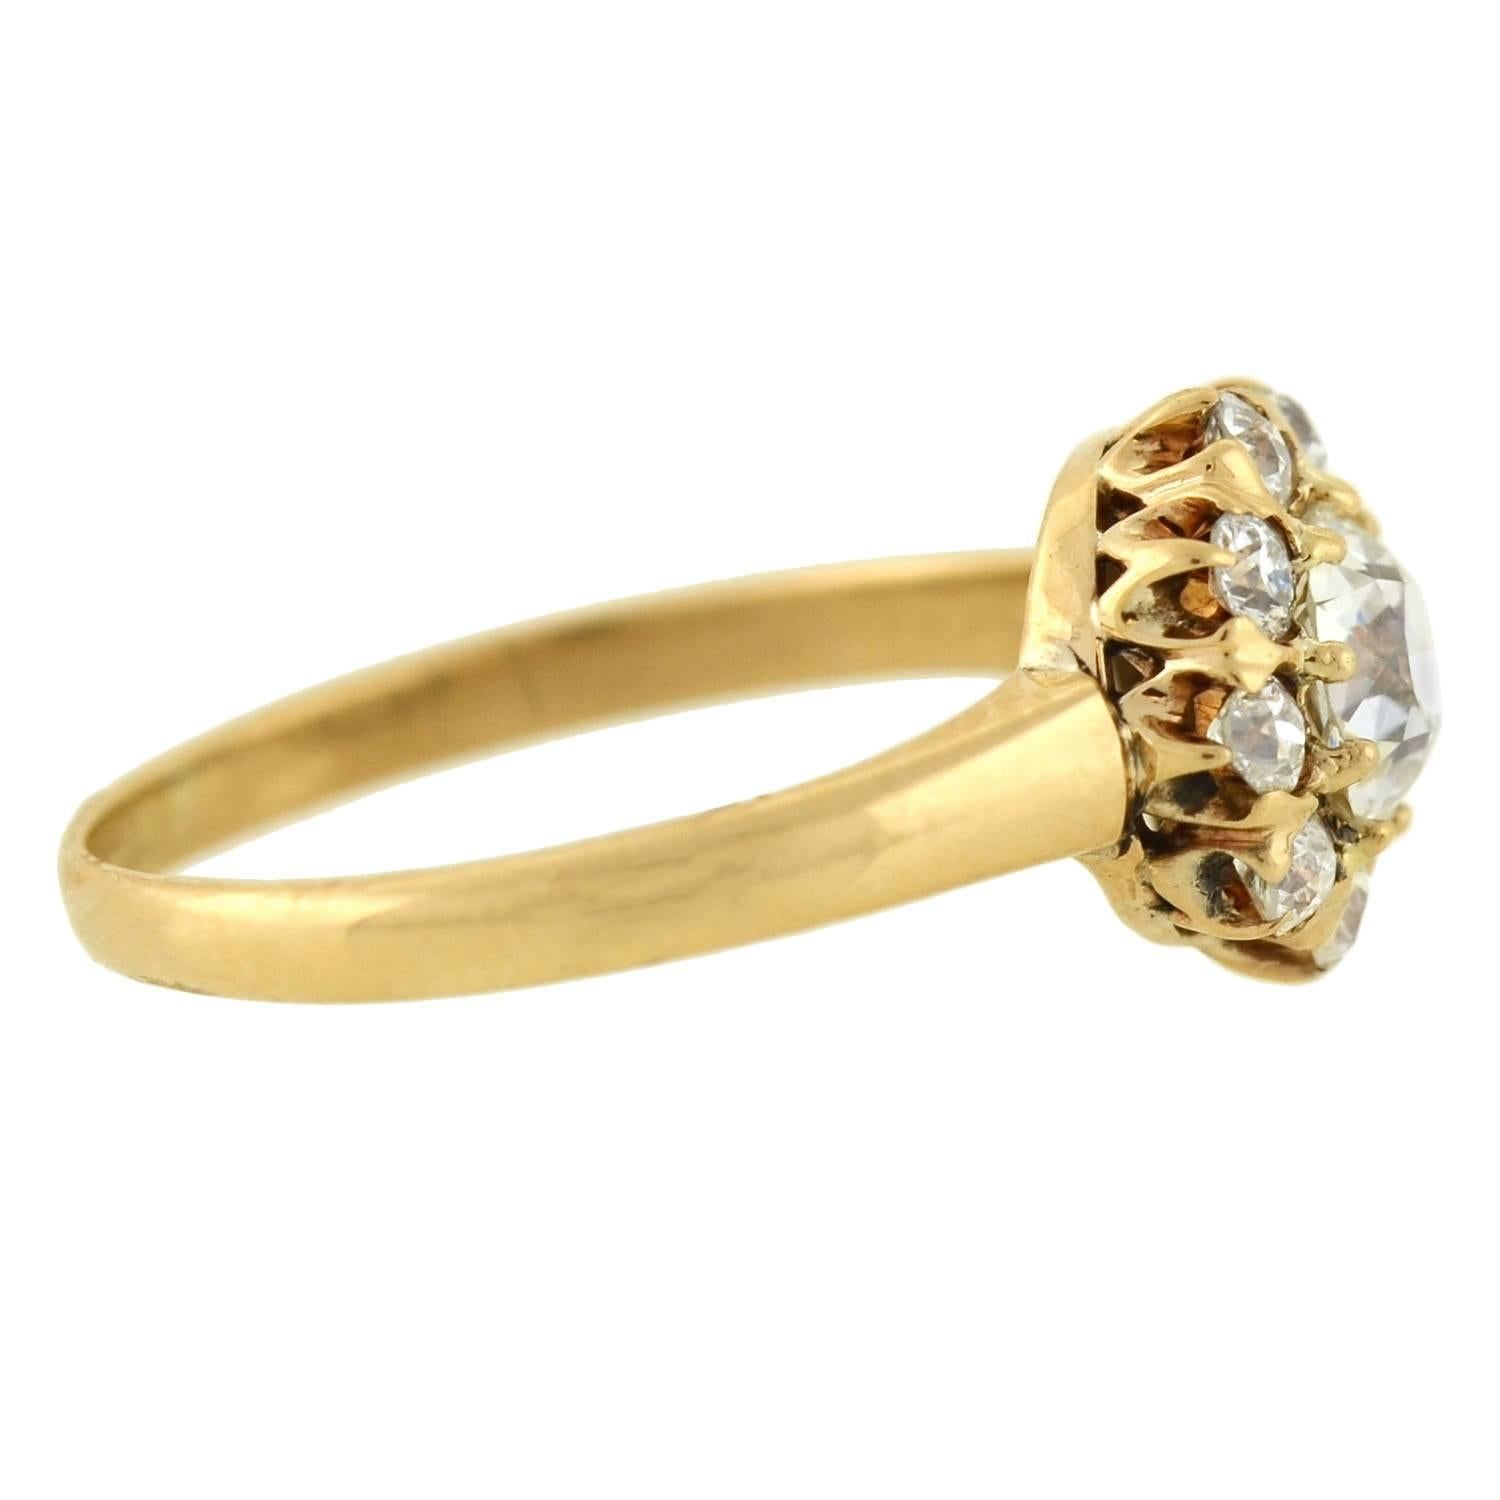 A beautiful diamond cluster ring from the Victorian (ca1880) era! This lovely 14kt gold ring holds a sparkling cluster of old Mine Cut diamonds at the center. Collectively, the diamonds have a total carat weight of approximately 1.05ctw. The center